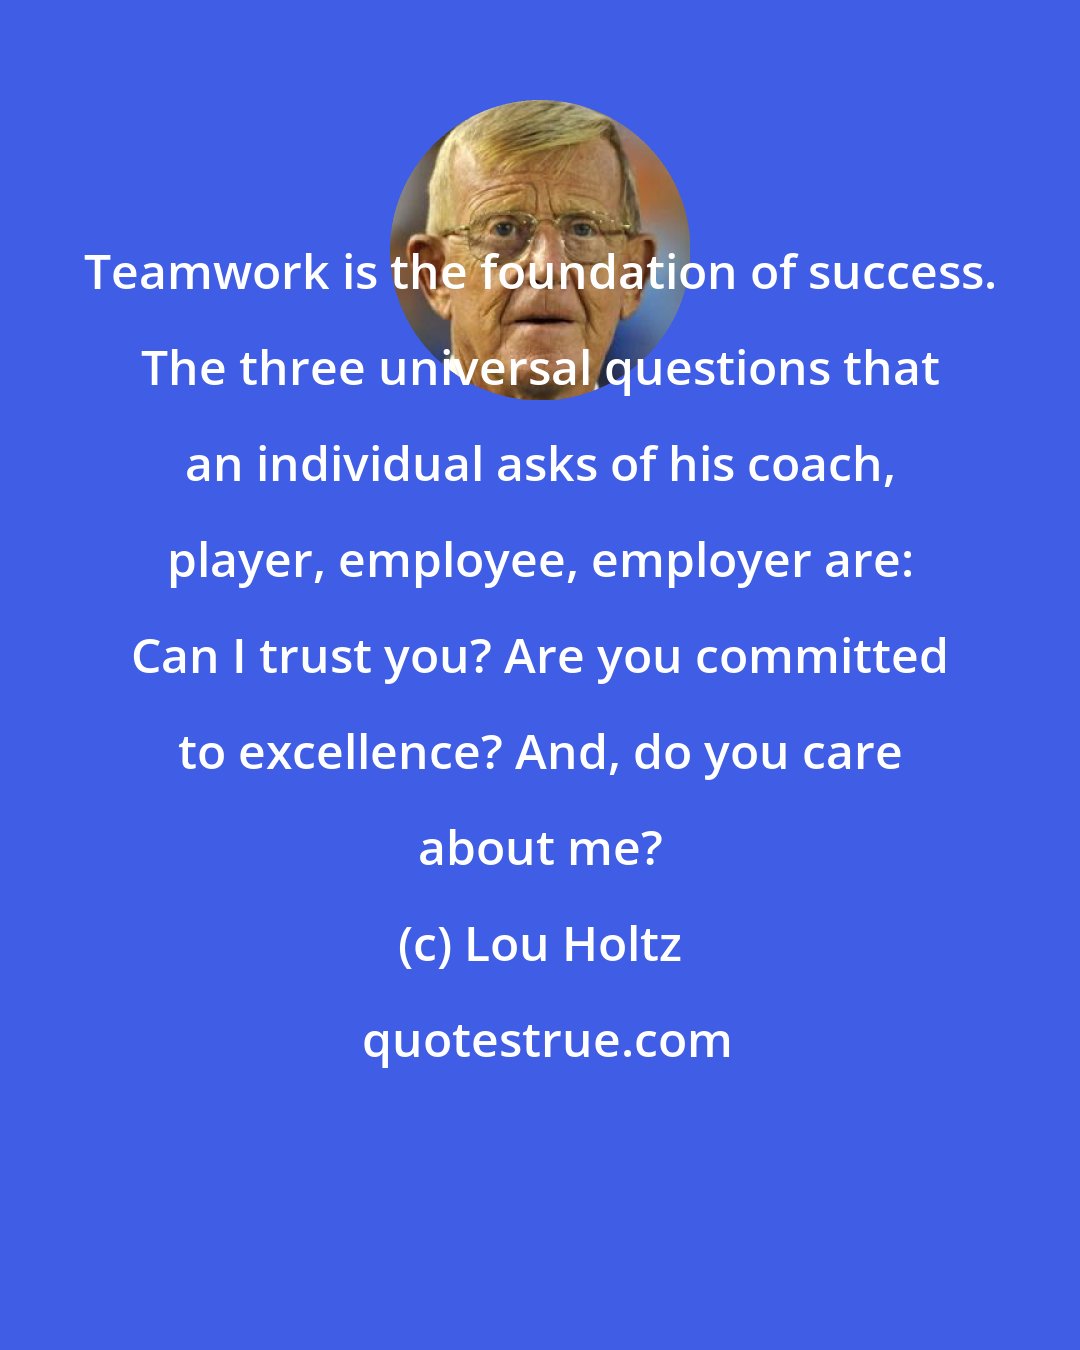 Lou Holtz: Teamwork is the foundation of success. The three universal questions that an individual asks of his coach, player, employee, employer are: Can I trust you? Are you committed to excellence? And, do you care about me?